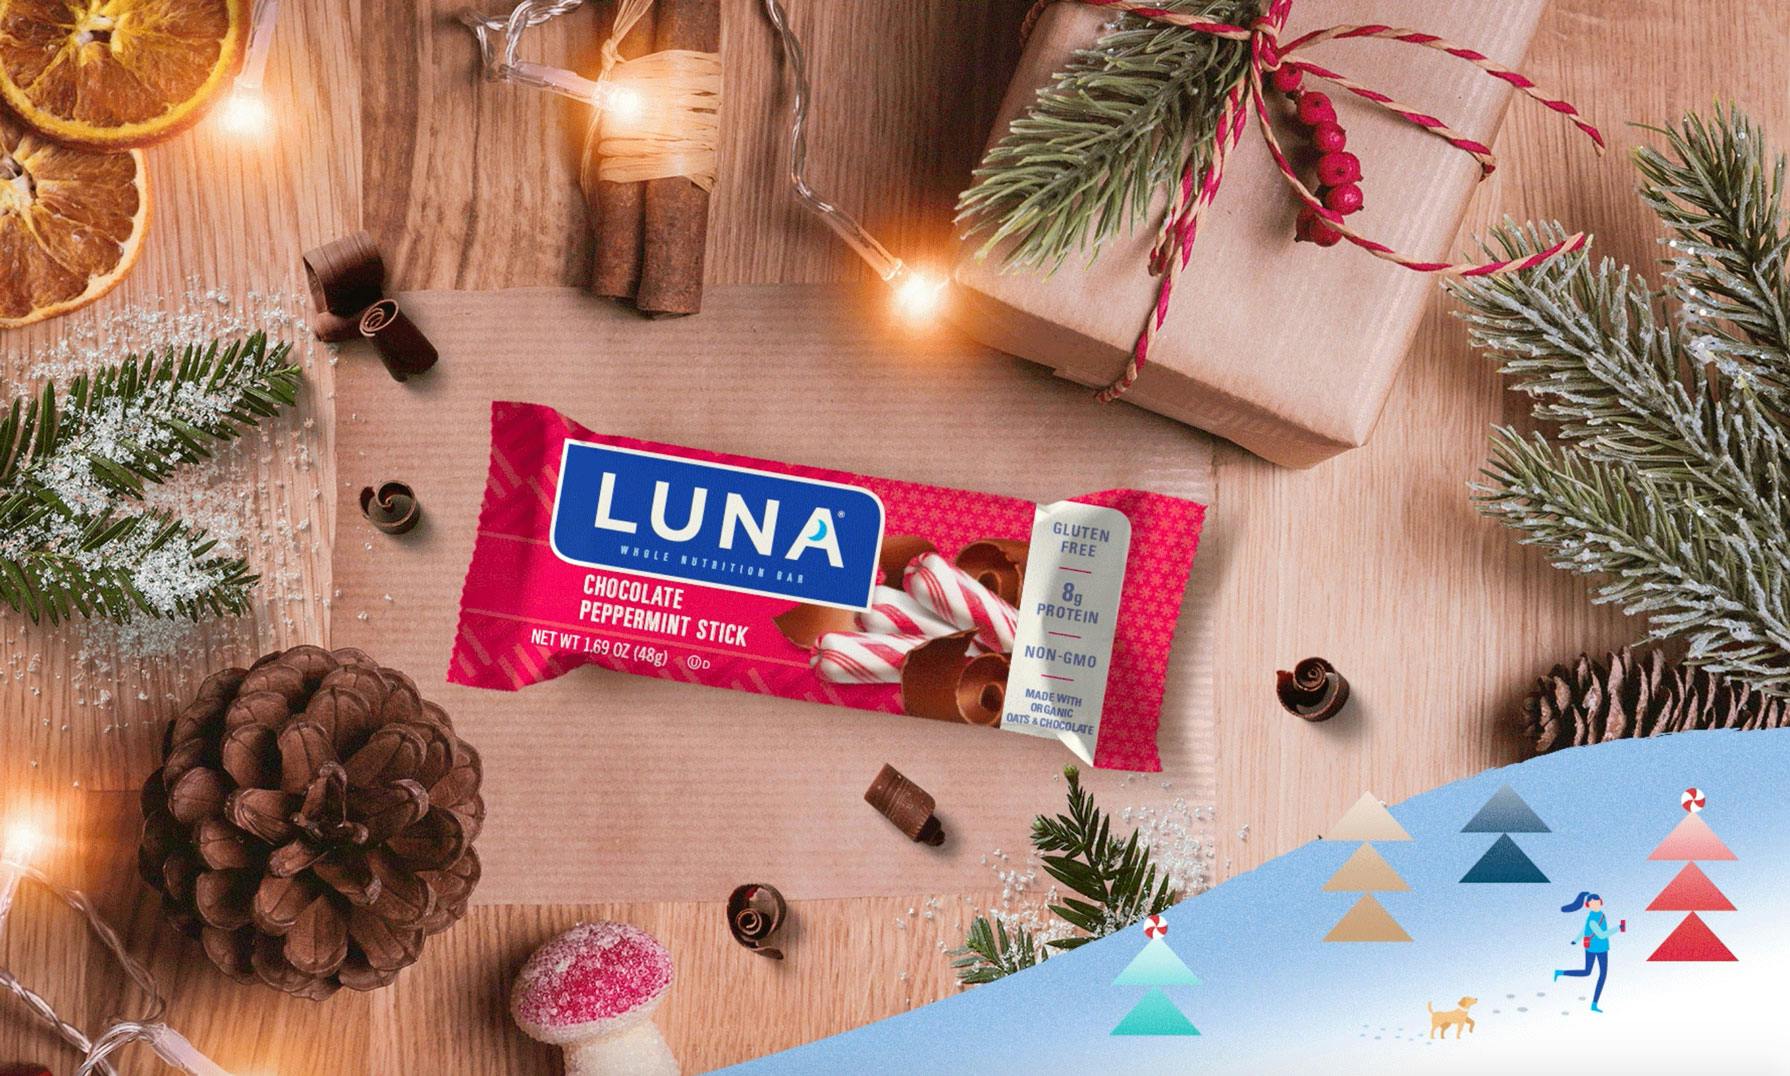 Luna chocolate peppermint stick with holiday decor